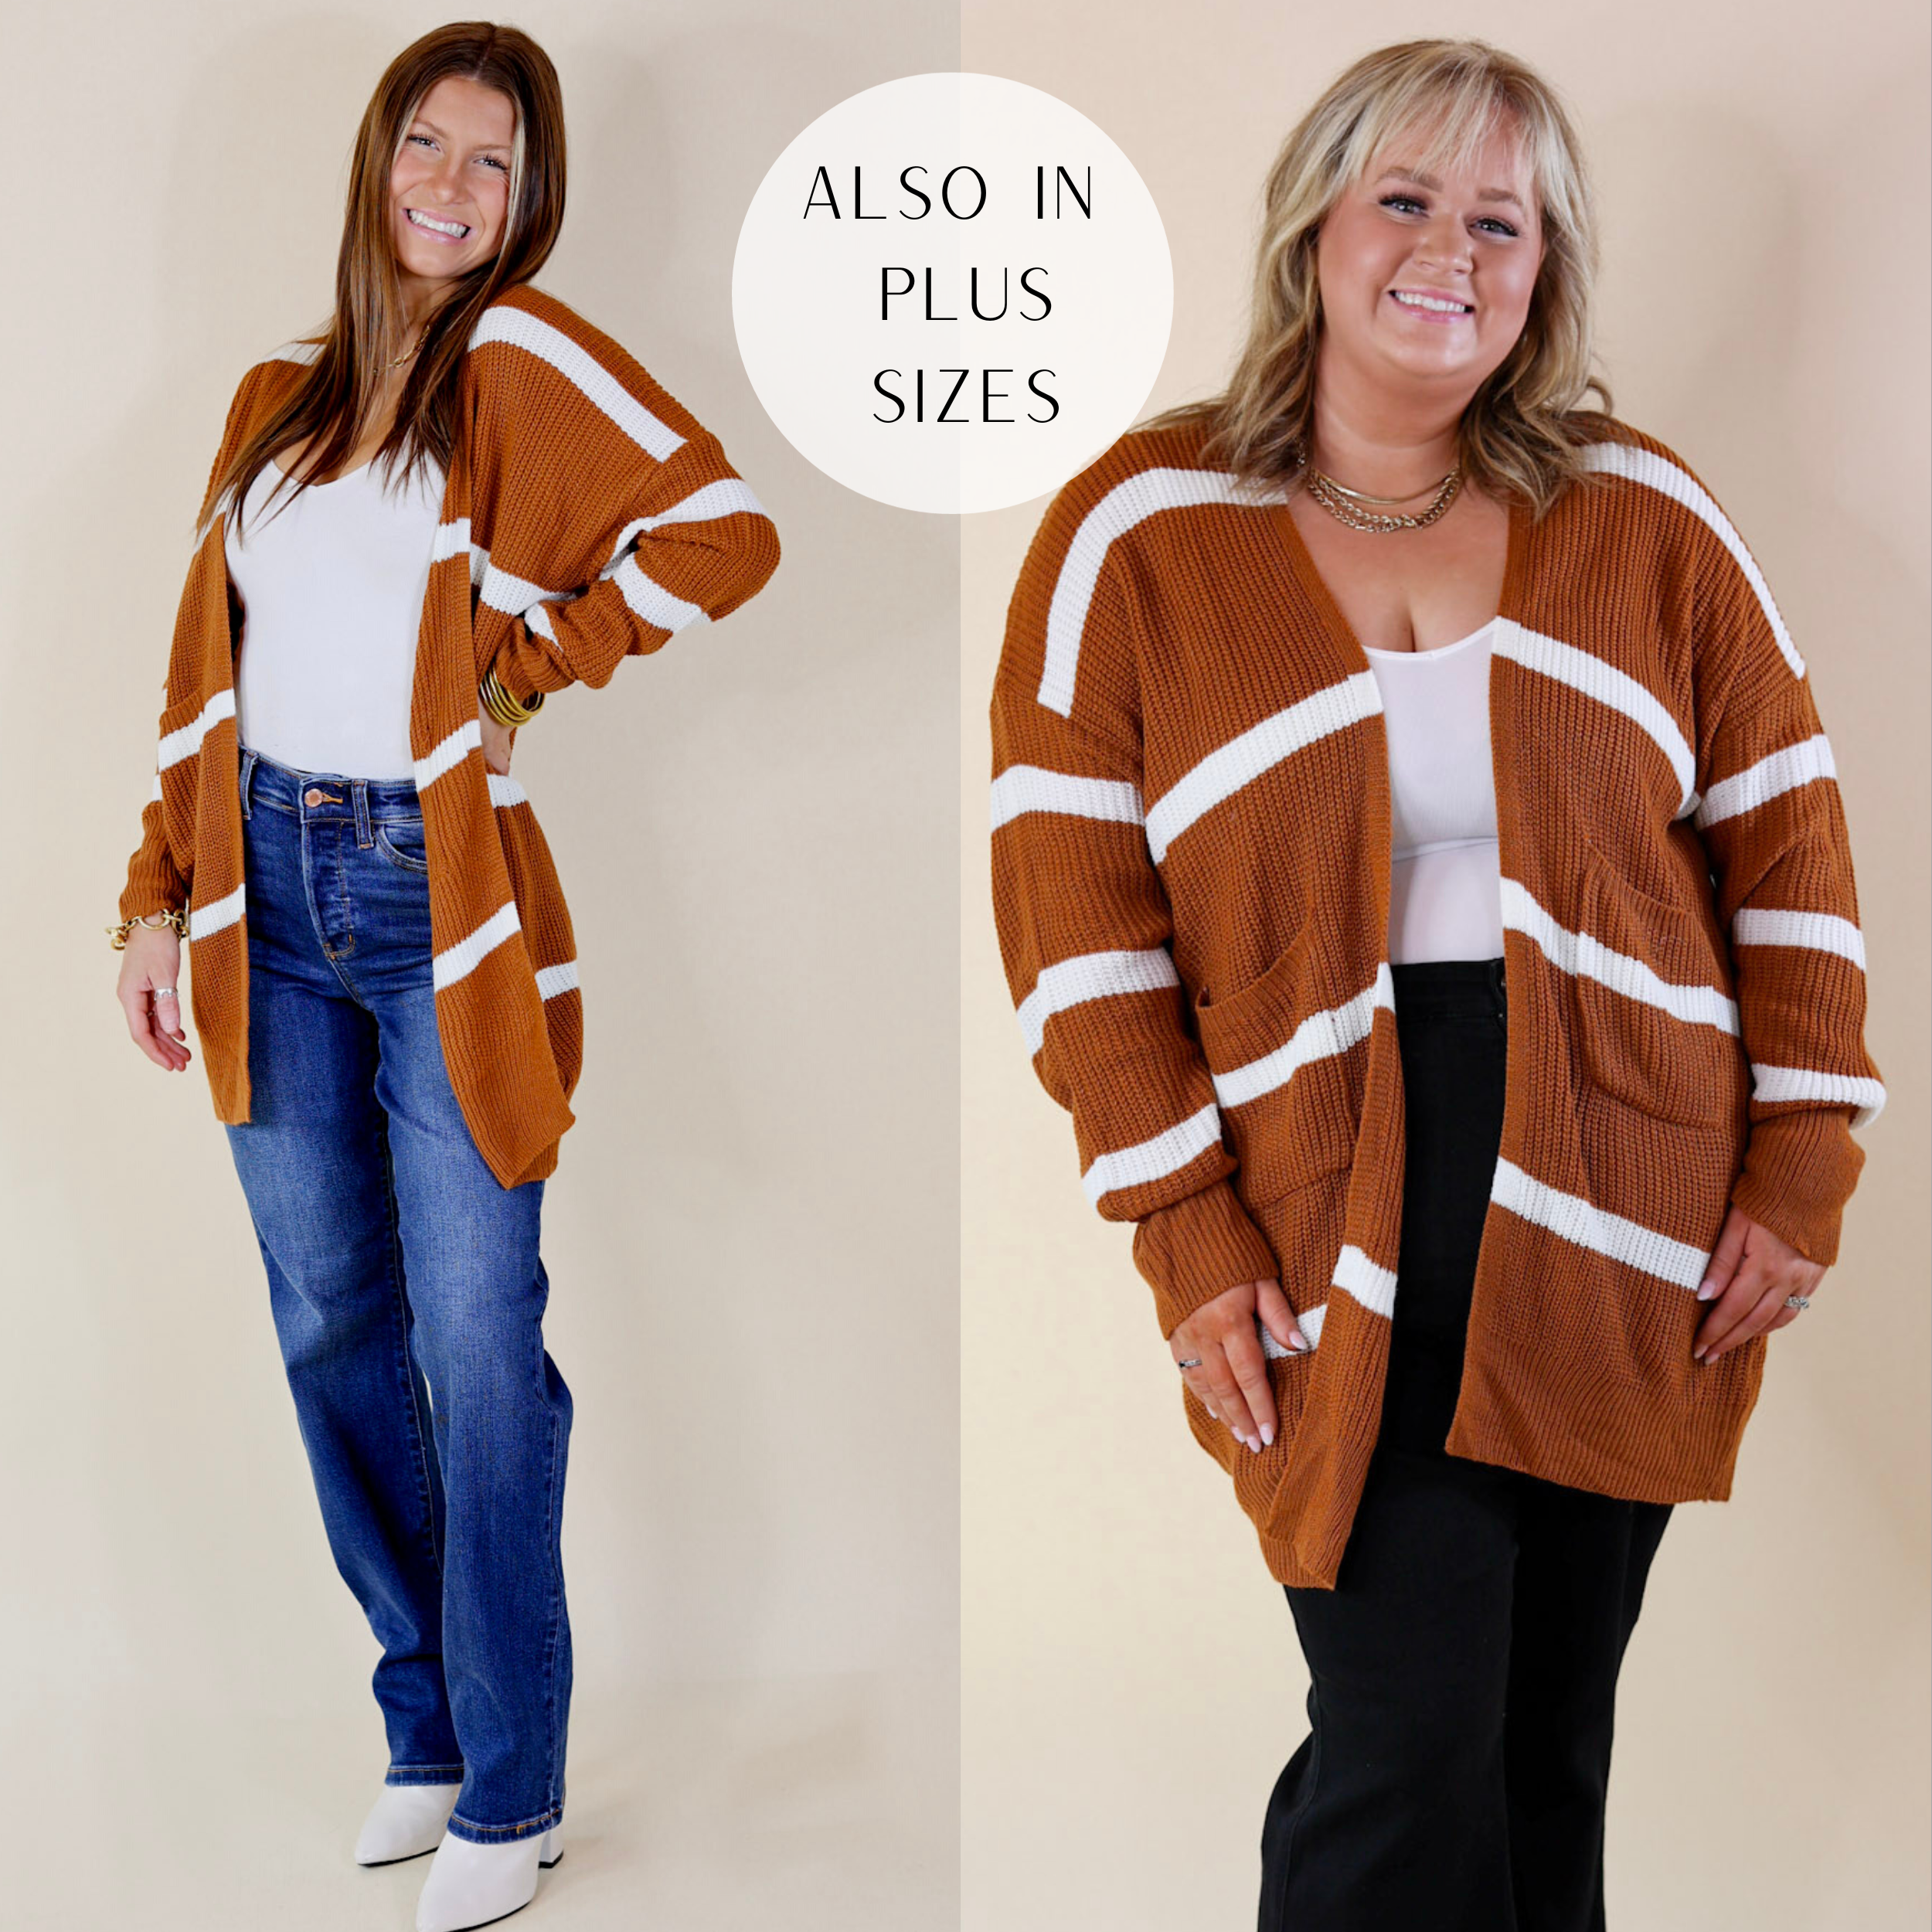 in the picture the model is wearing a cozy striped long sleeve cardigan in rust with a white background